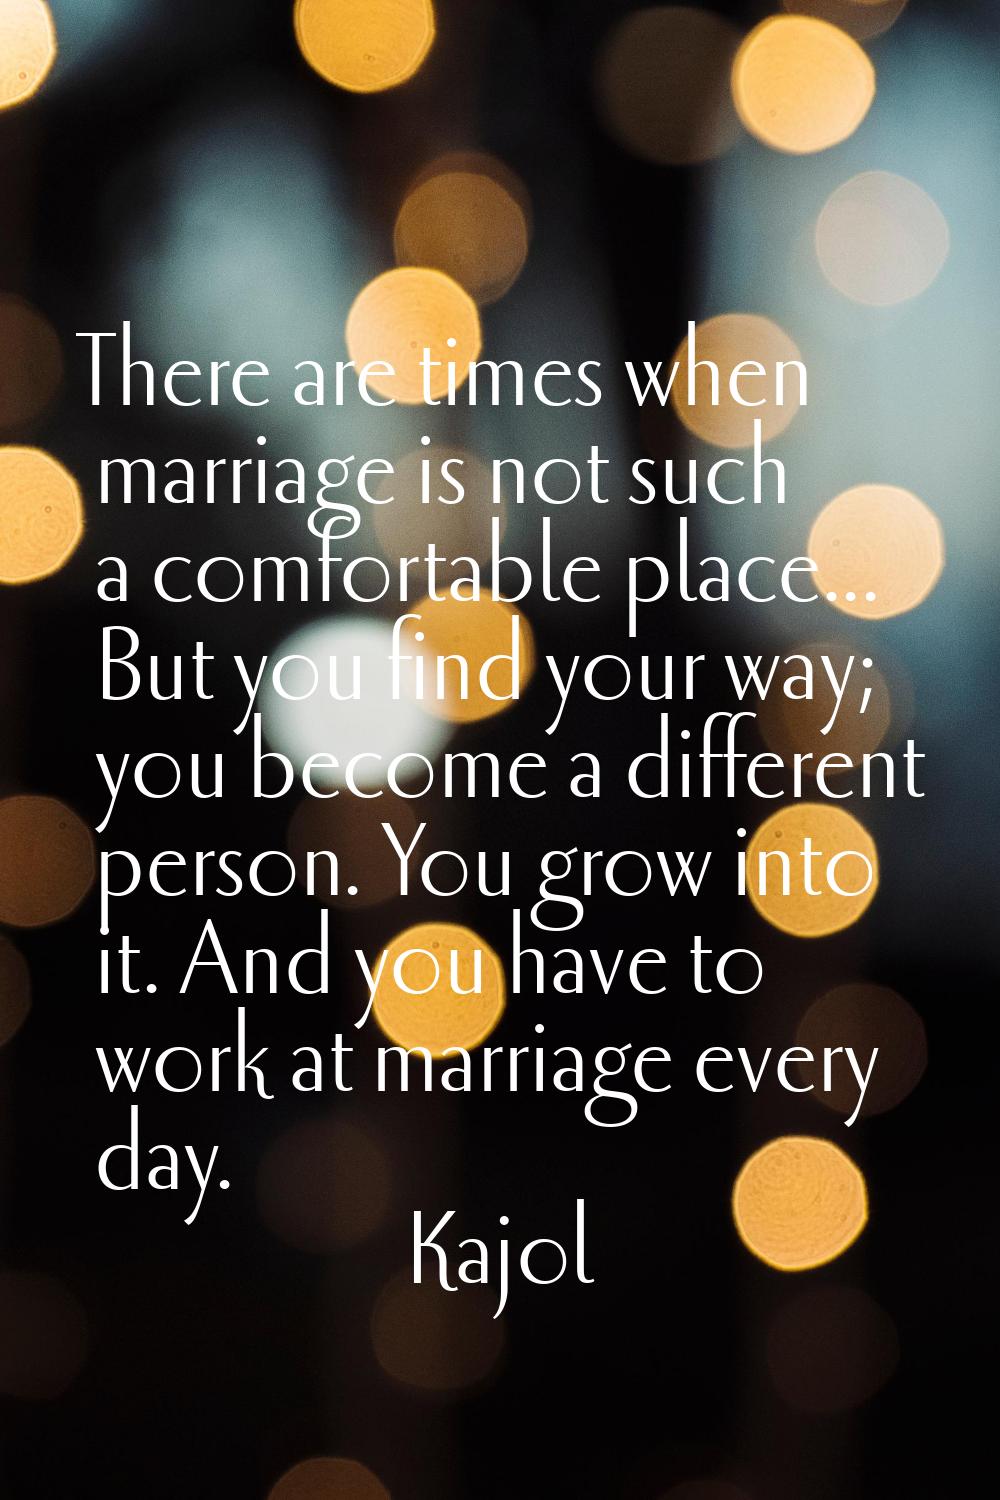 There are times when marriage is not such a comfortable place... But you find your way; you become 